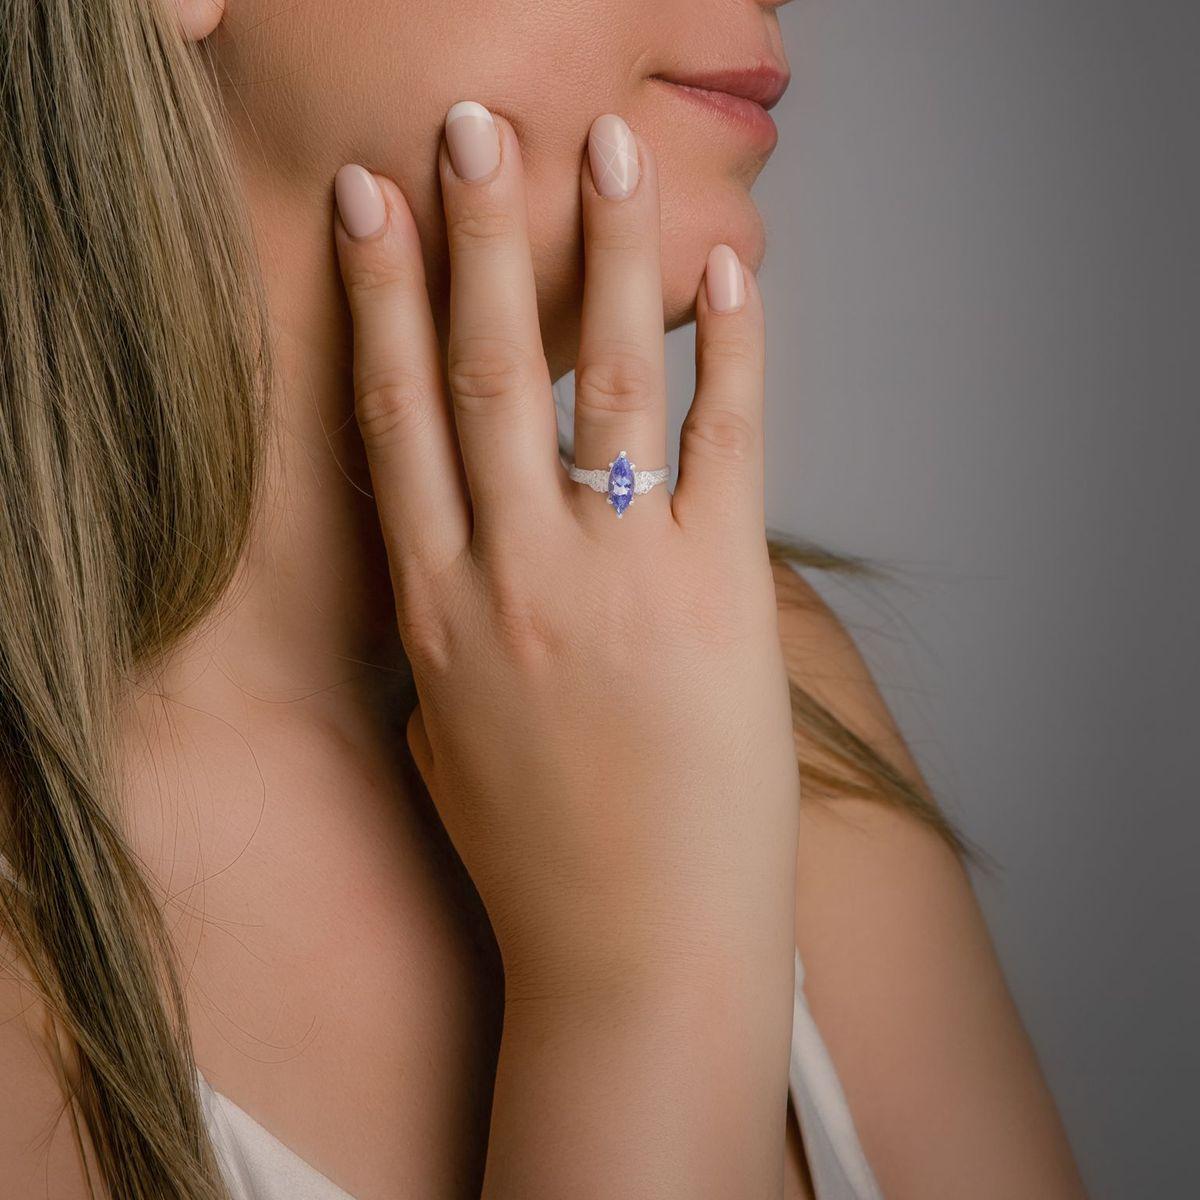 This ring whispers stories of twilight skies and moonlit meadows, captivating hearts with its dazzling dance of colors and elegant design. A marquise-cut Tanzanite, 1.52 carats of pure violetish-blue magic, takes center stage, its facets shimmering